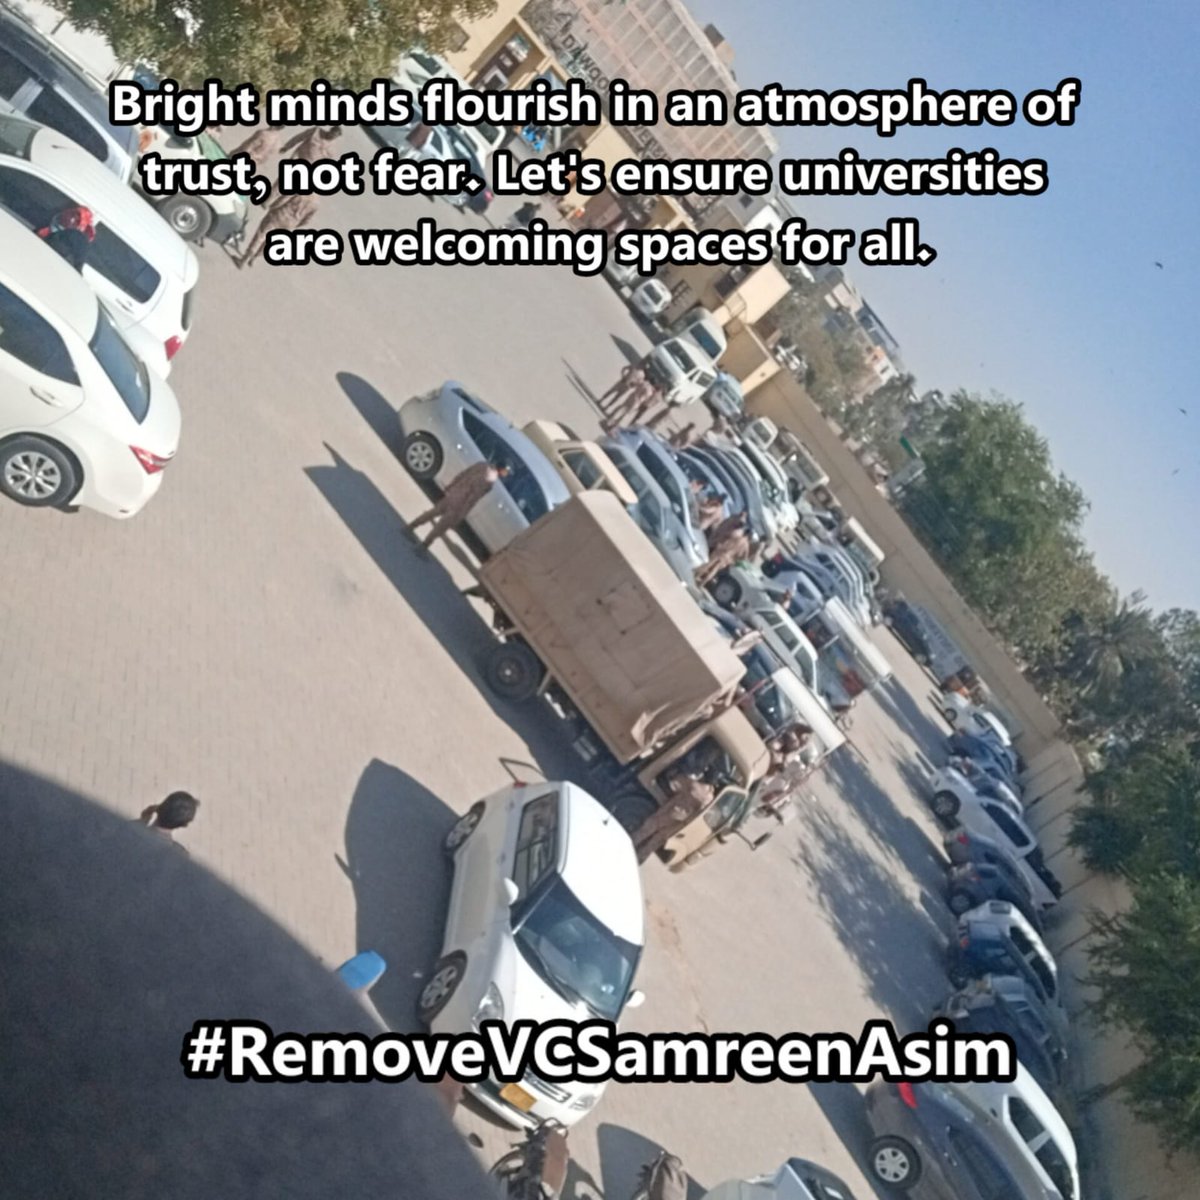 A united community can achieve great things. Let's stand together in solidarity to protect the livelihoods and rights of our contractual employees. @ZahoorSb 
#RemoveVCSamreenAsim